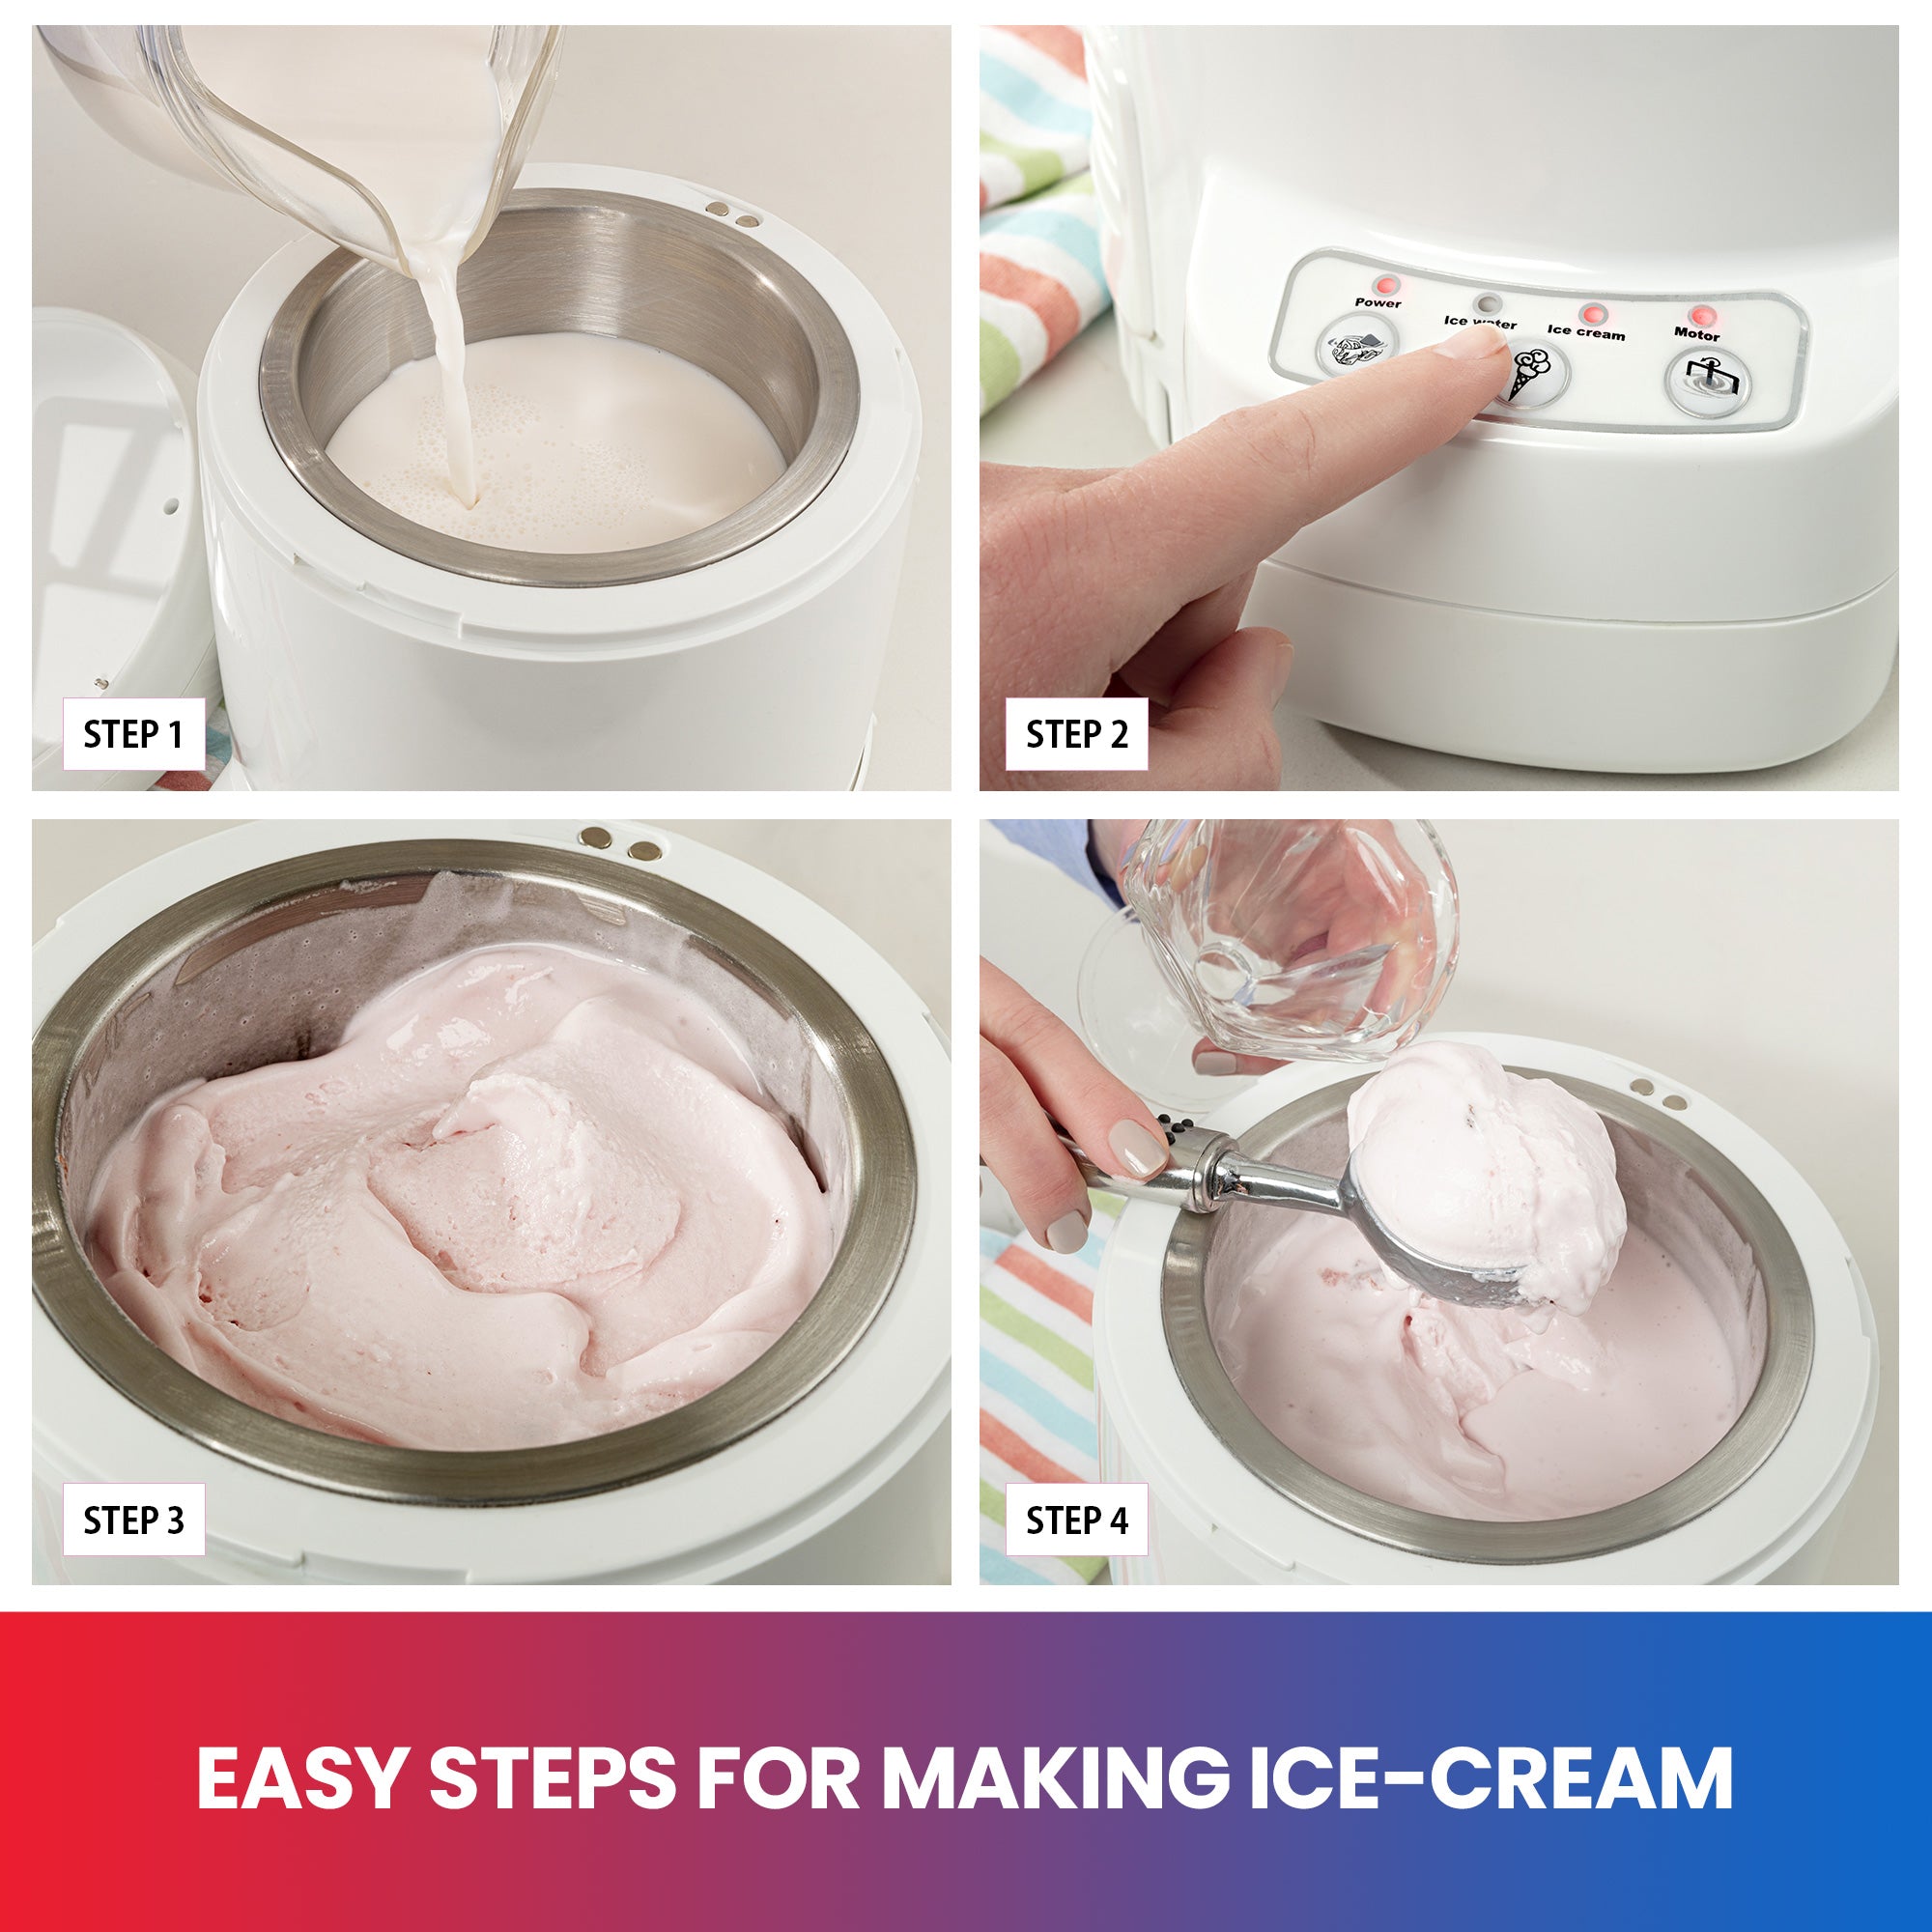 Four closeup images of the ice cream making process: Step 1 shows ingredients being poured into ice cream maker; Step 2 shows a person's finger pressing a button on the control panel; Step 3 shows the frozen ice cream in the ice cream maker; Step 4 shows a person's hand scooping ice cream. Text below reads, "Easy steps for making ice cream"